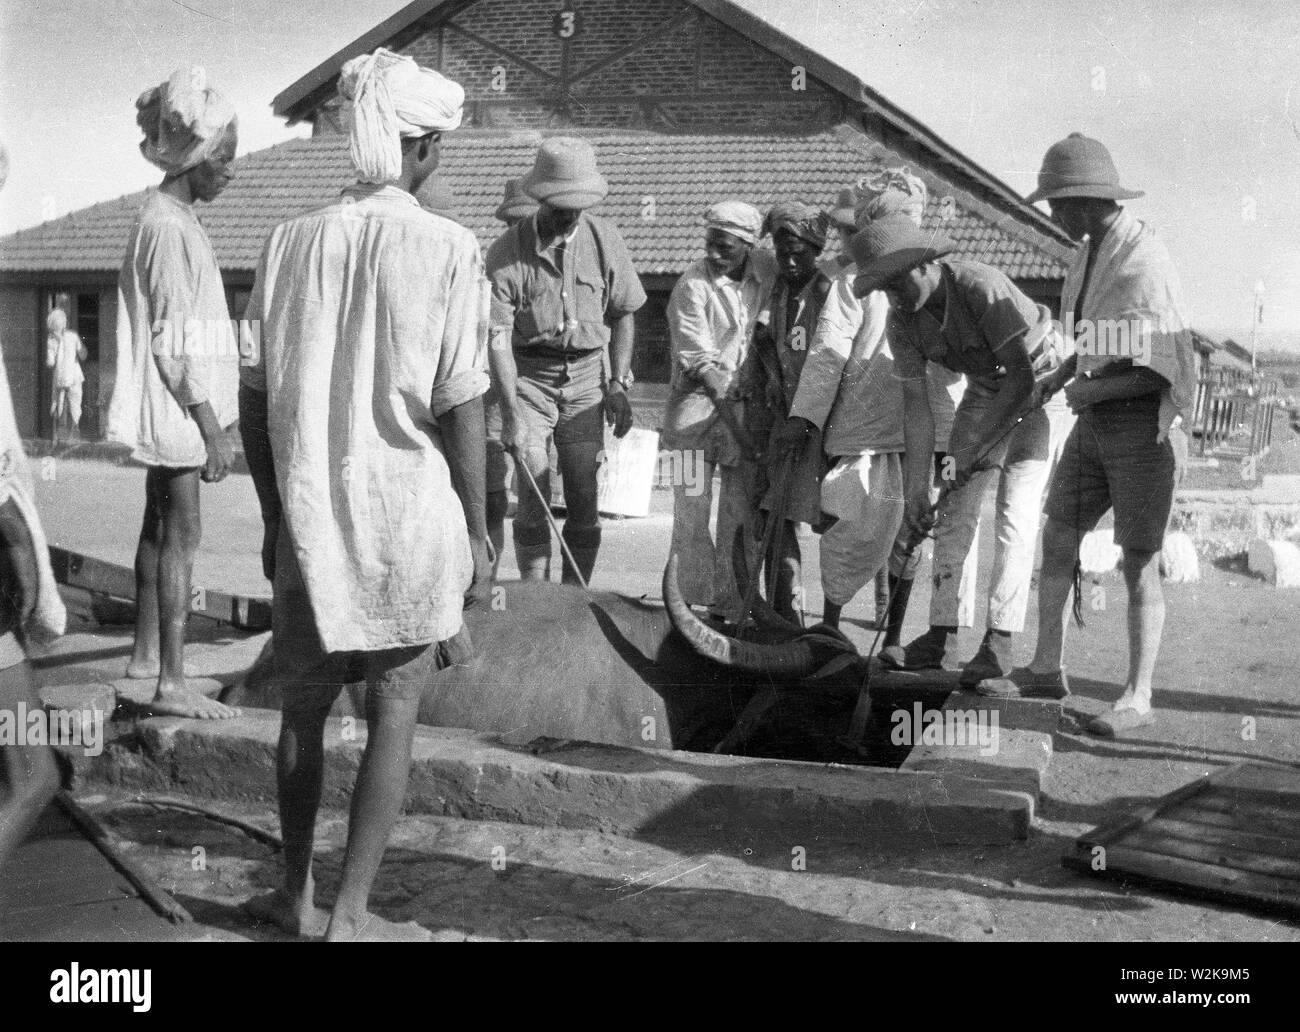 Rescue of oxen from well in village near Bombay, India under the British Raj in 1908 Stock Photo